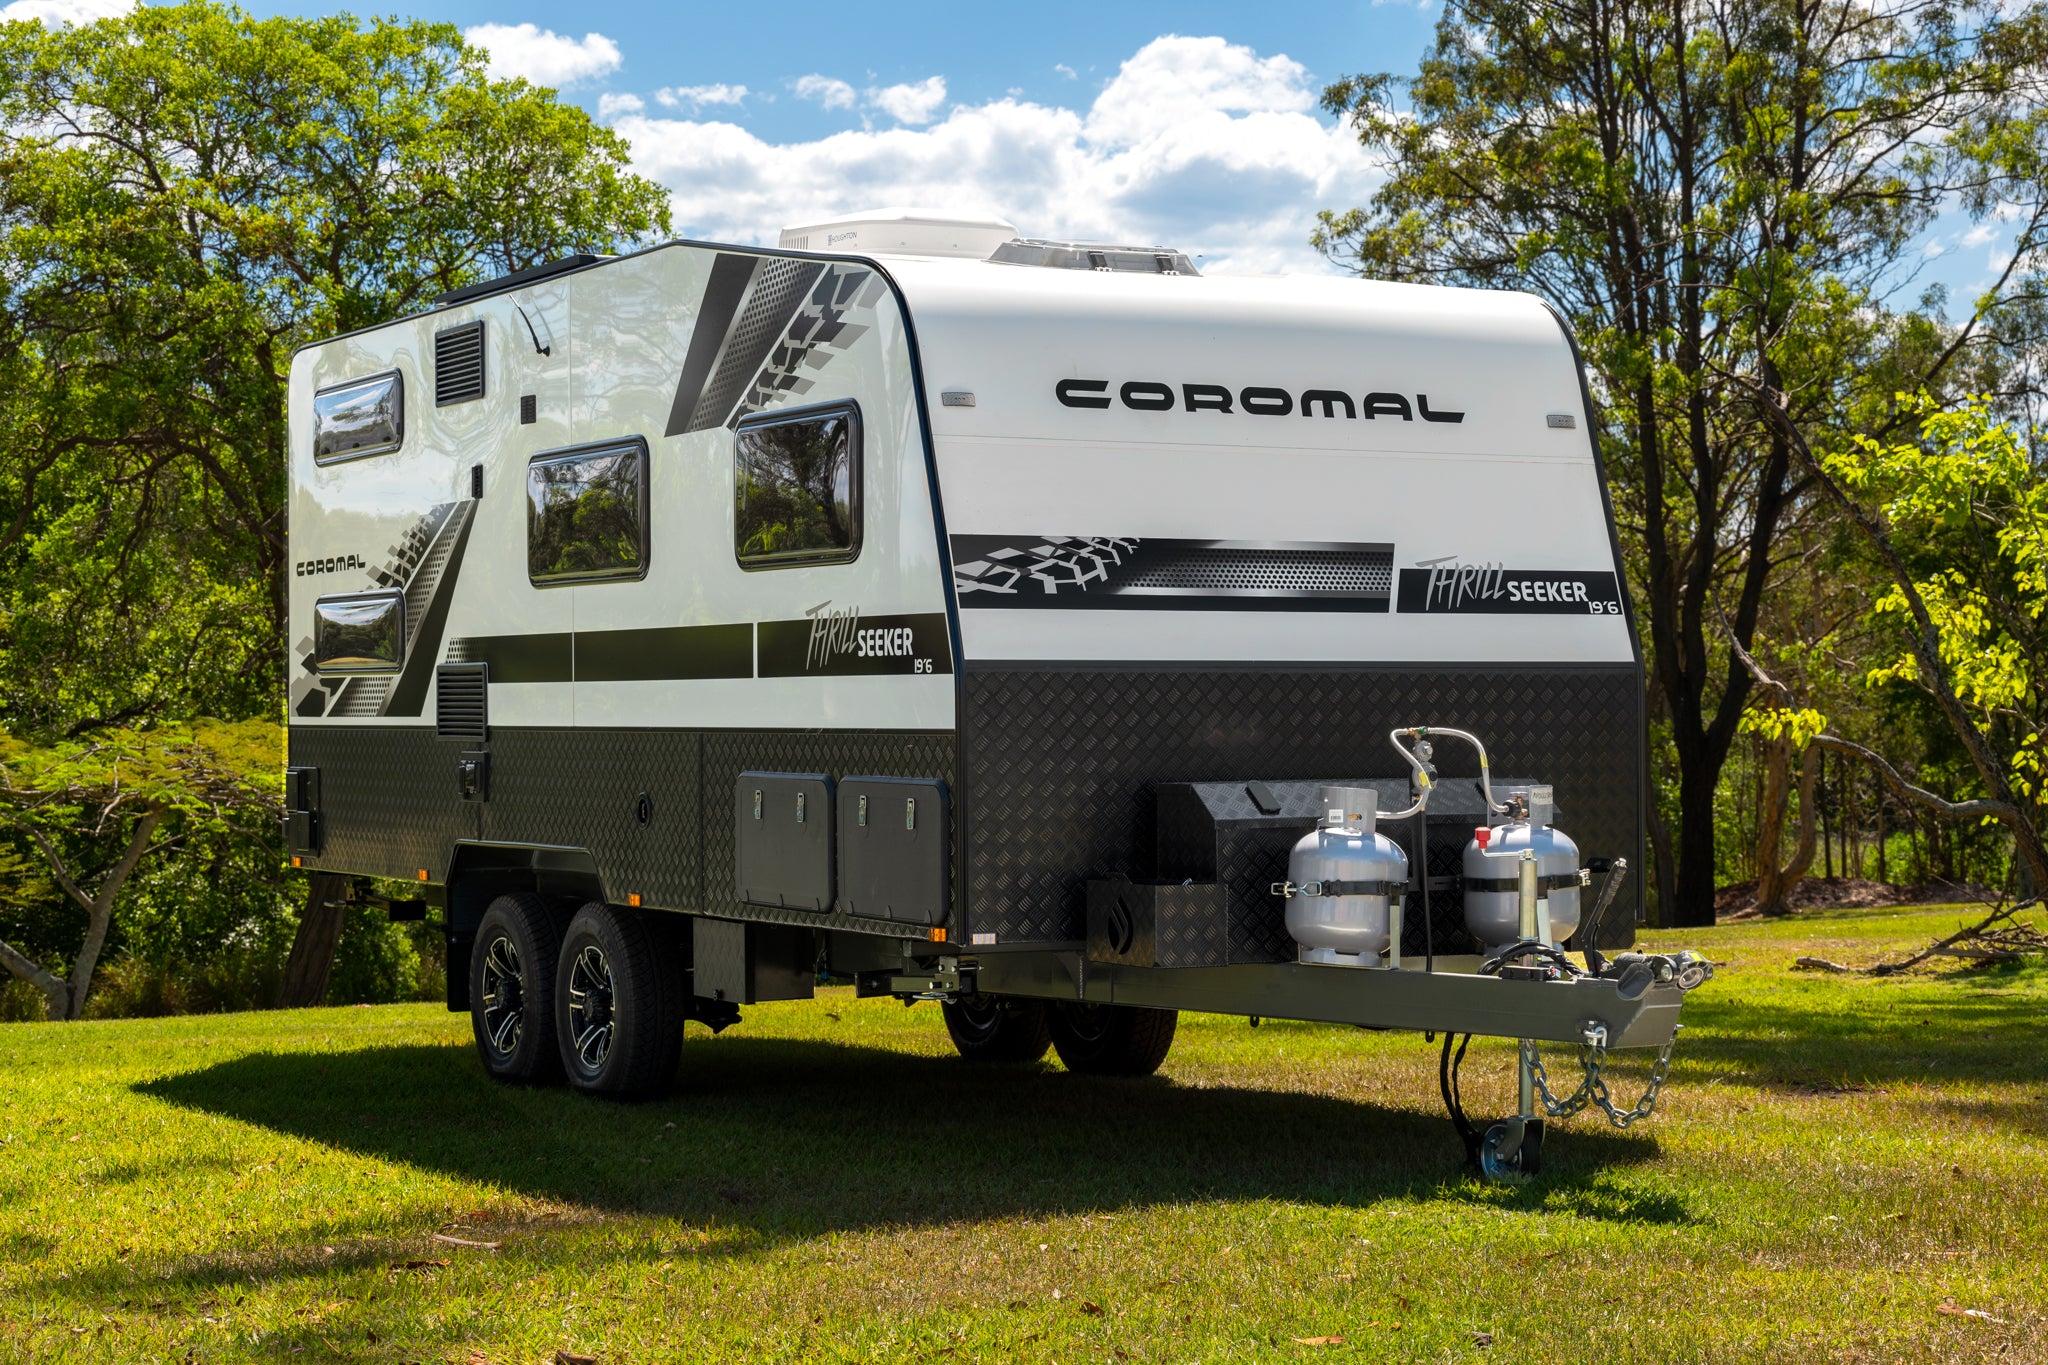 Coromal Thrill Seeker 19'6 Family external front view with gas bottles